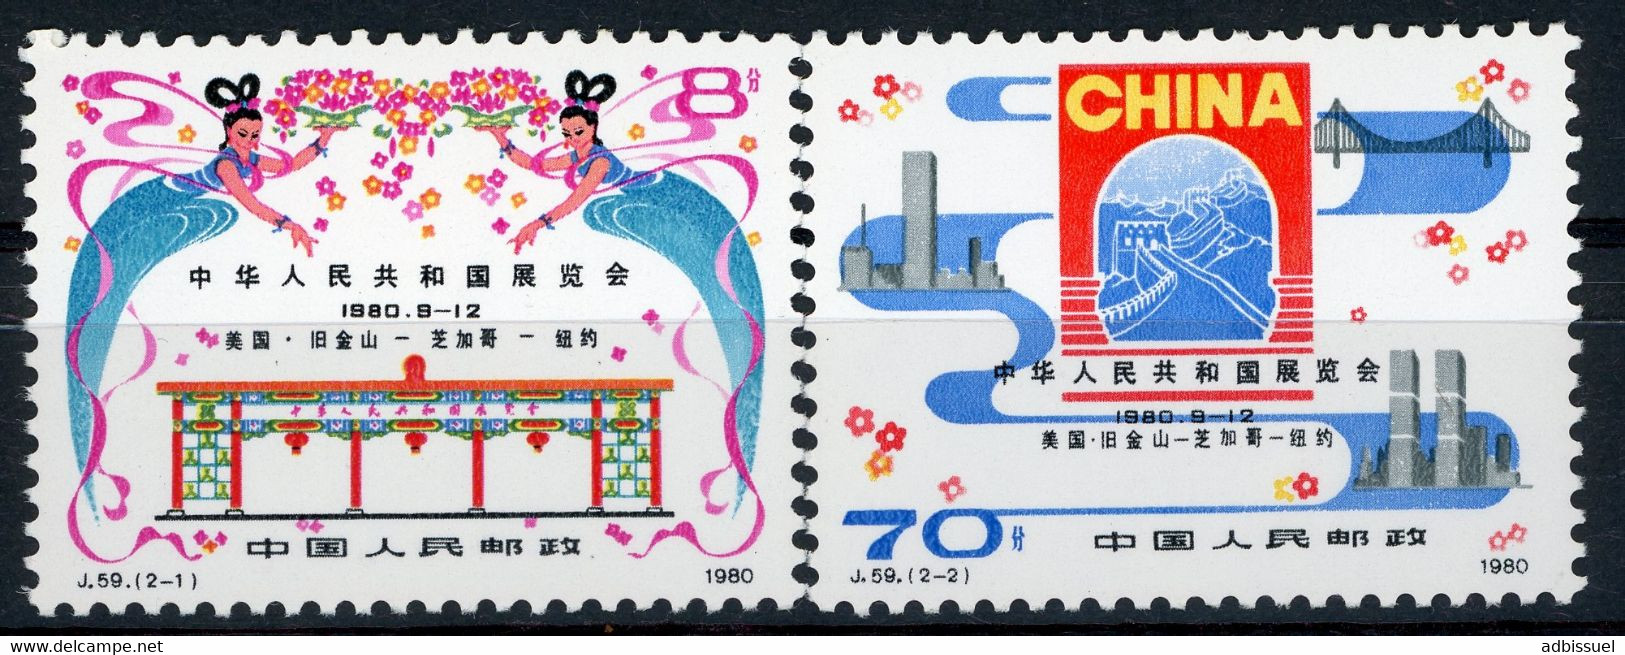 CHINA CHINE 1980 N° 2366 + 2367. Value (cote) 23 € MNH. VG/TB. Chinese Trade Show (Exposition Commerciale Chinoise) - Ungebraucht